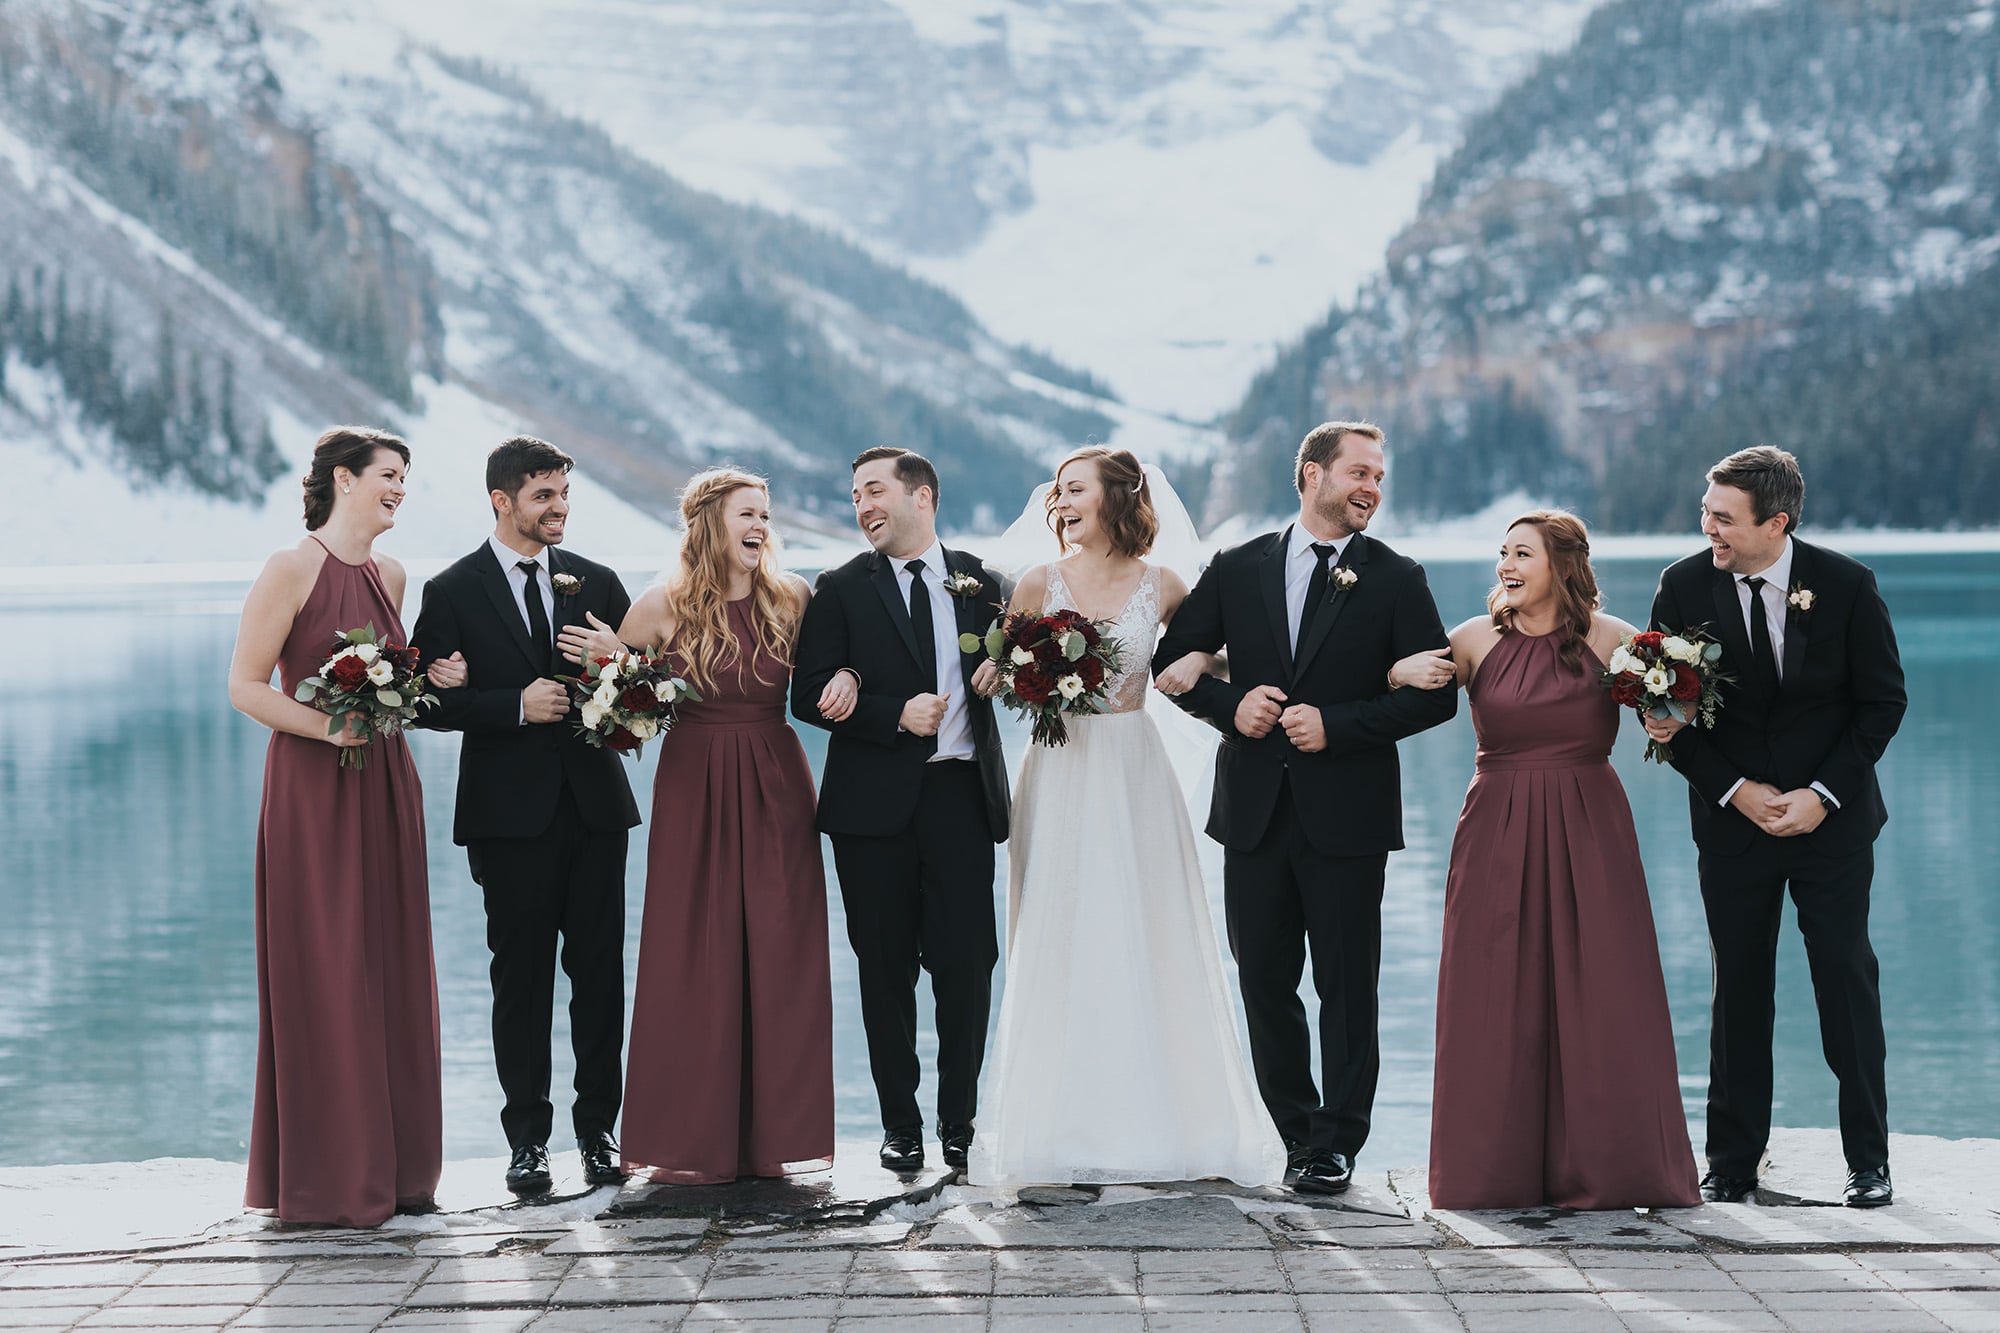 wedding party laughing during outdoor mountain wedding